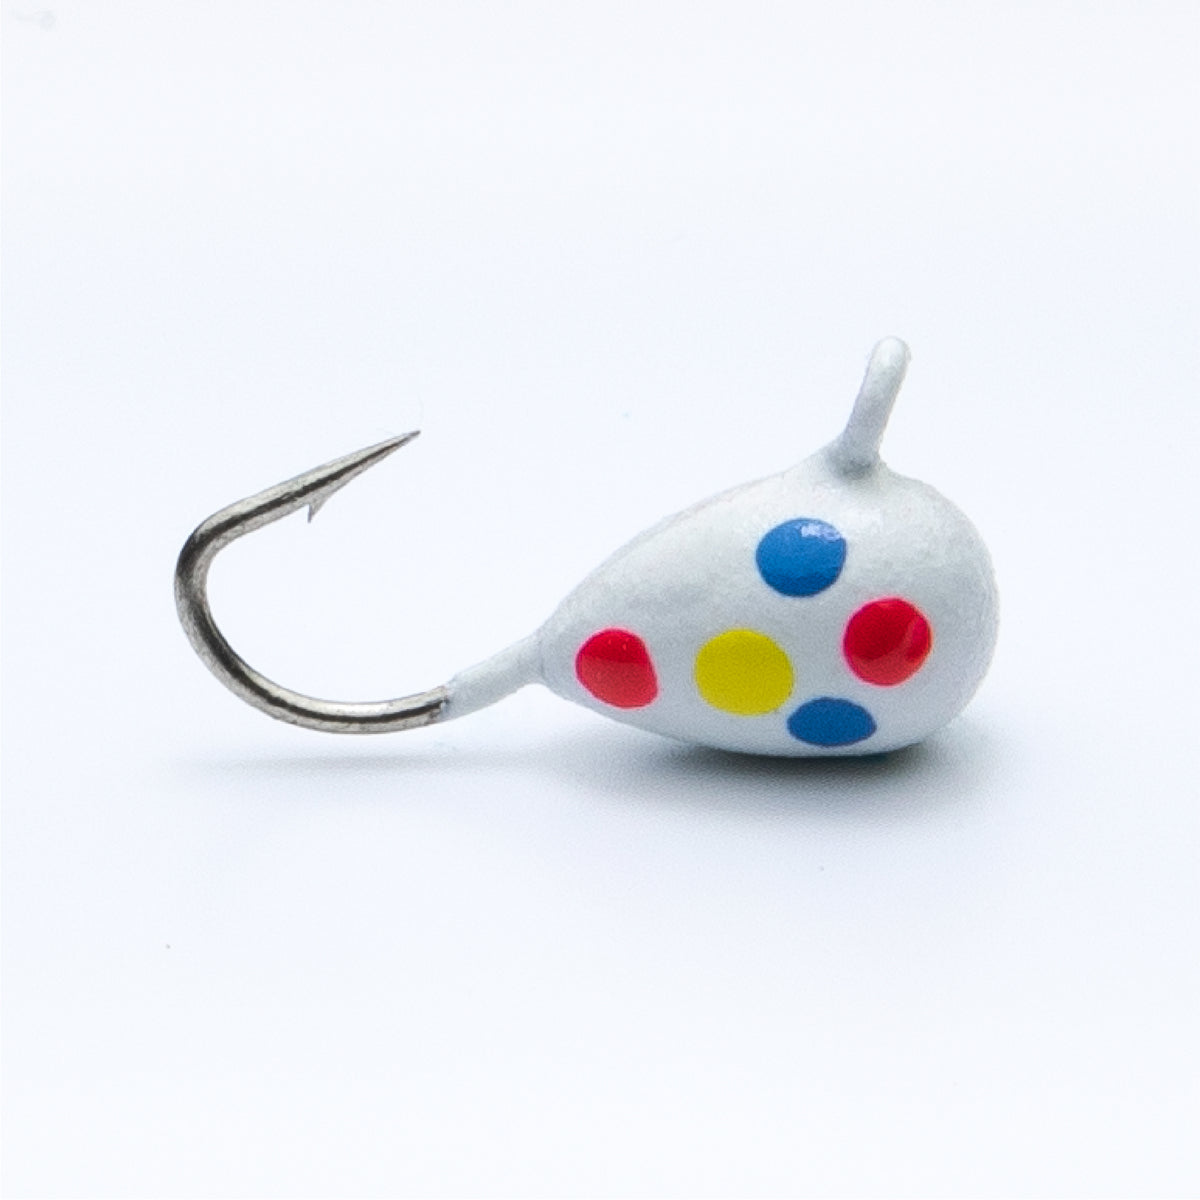 Pre-Rigged Crayfish Soft Lures with Treble Hook, Premium Durable